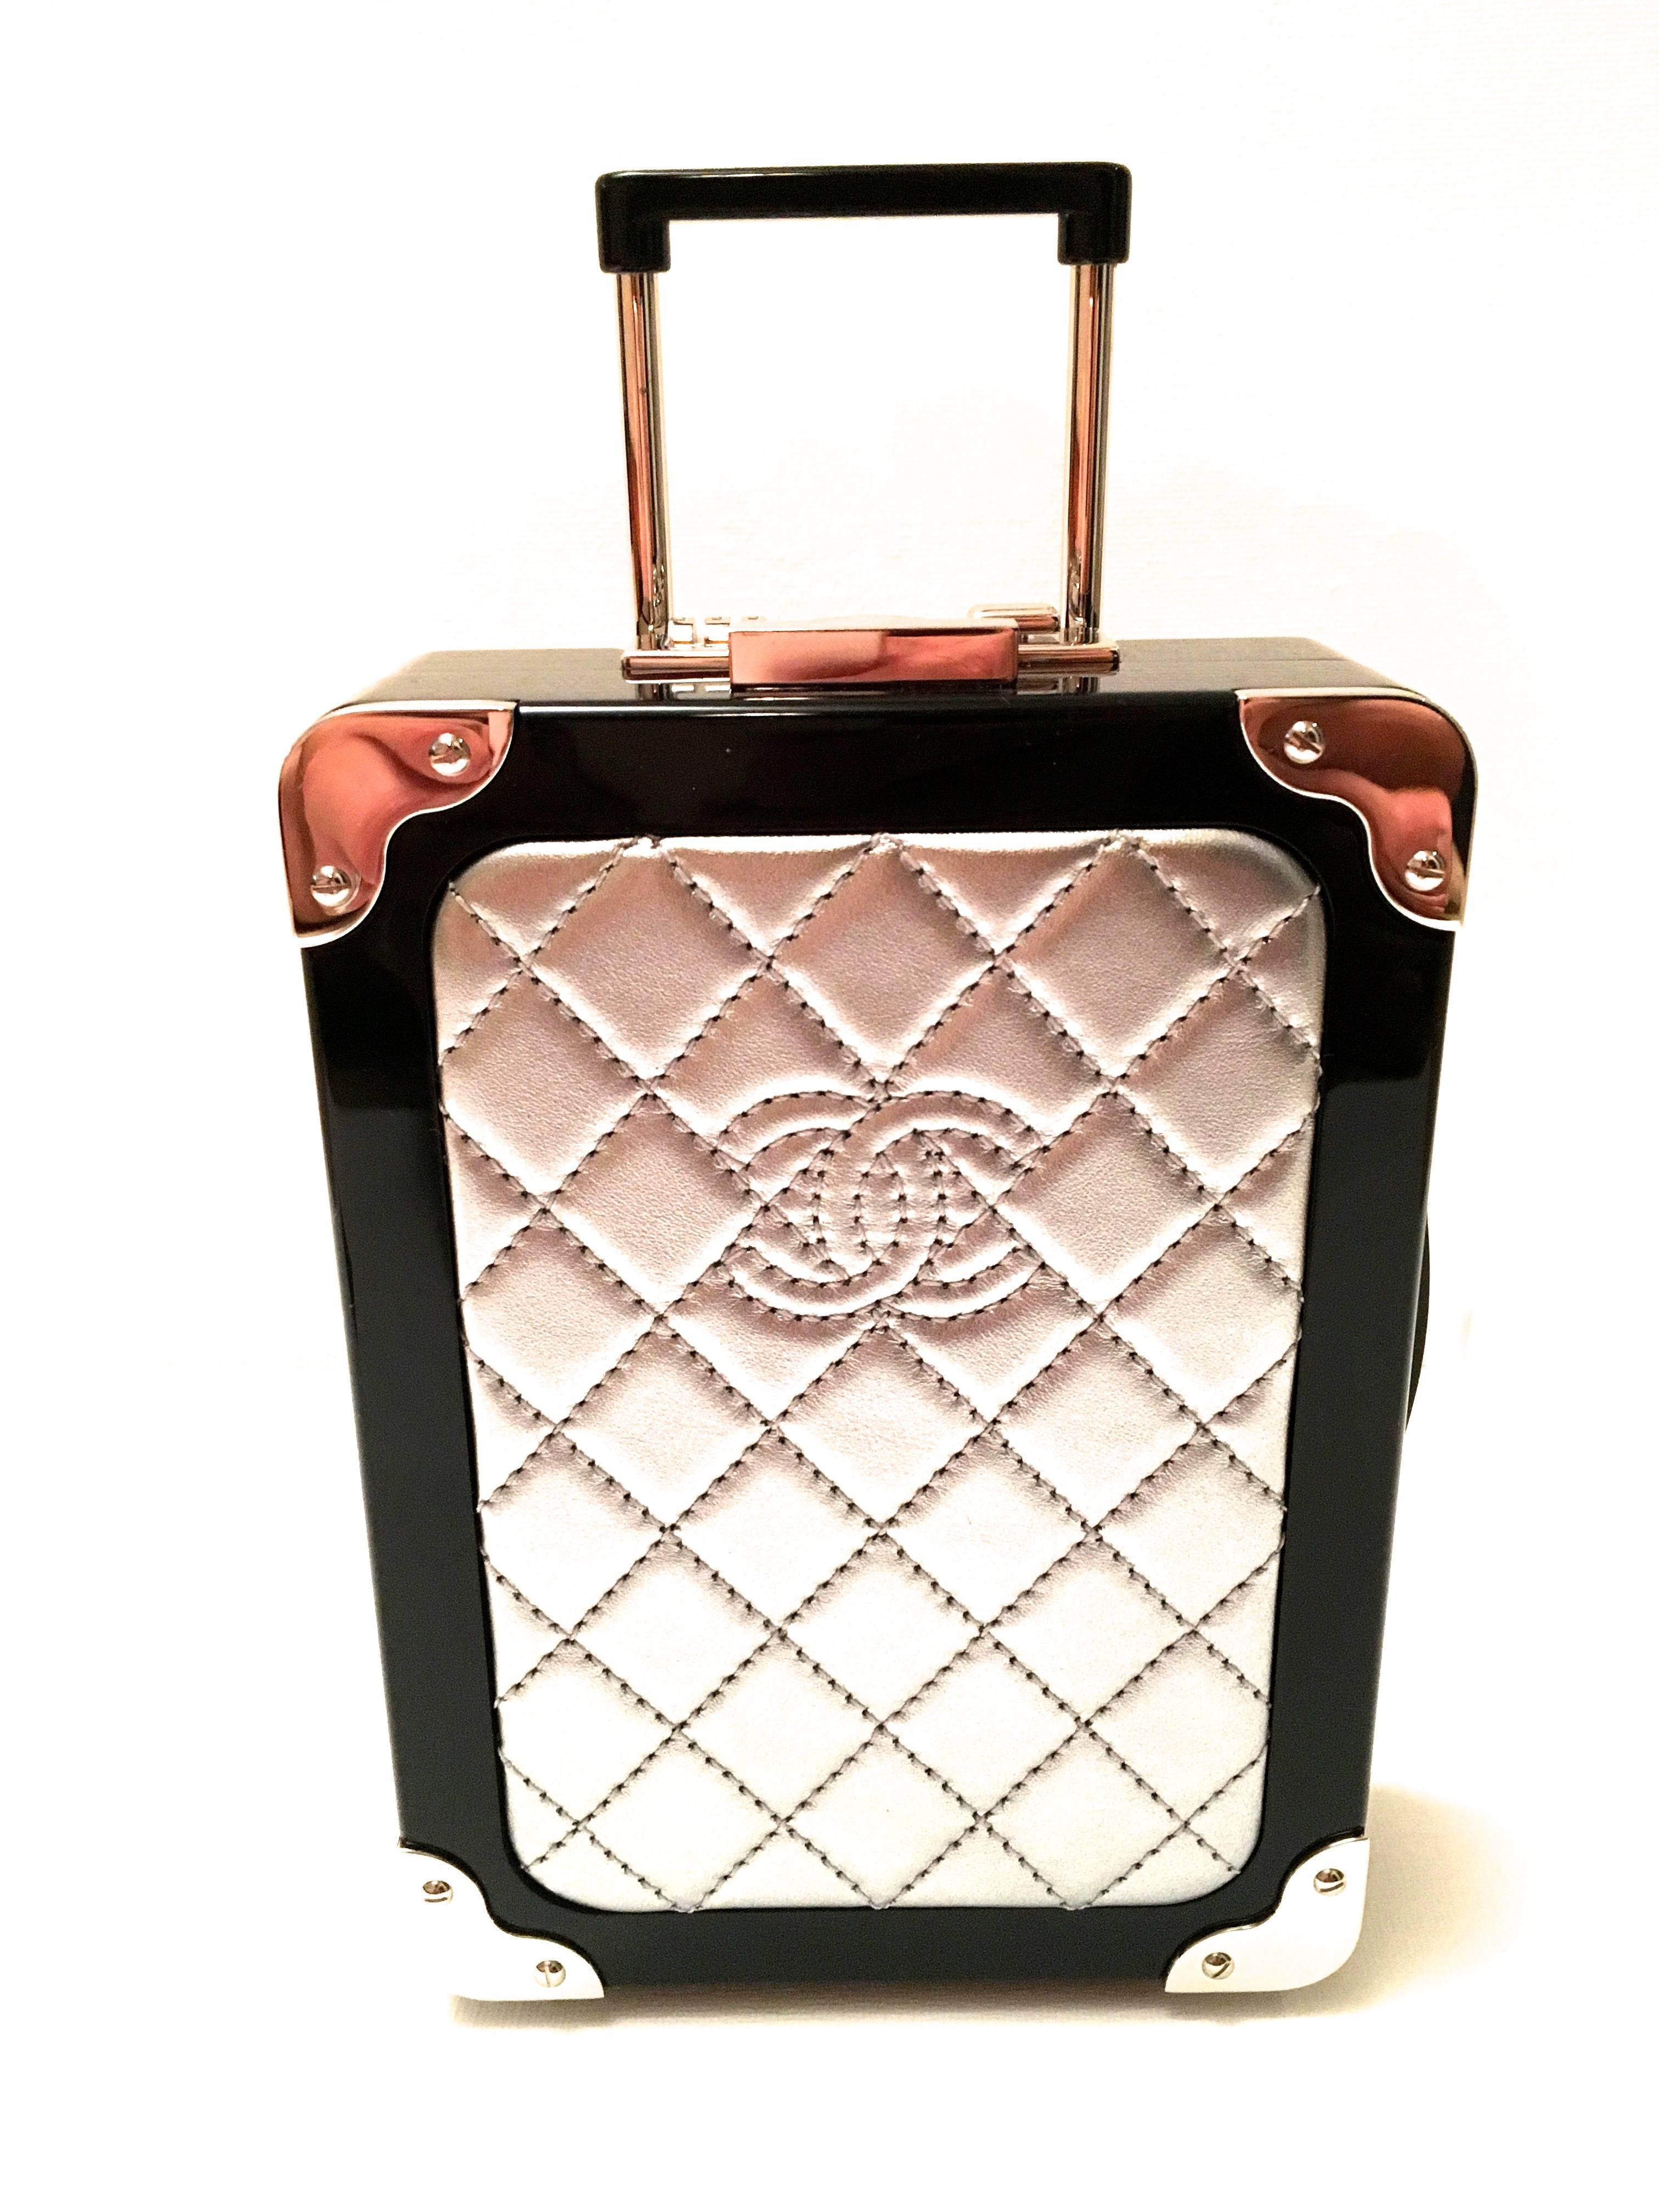 Women's Rare Chanel Runway Purse - Carry-on Bag - Airline Collection 2016 For Sale